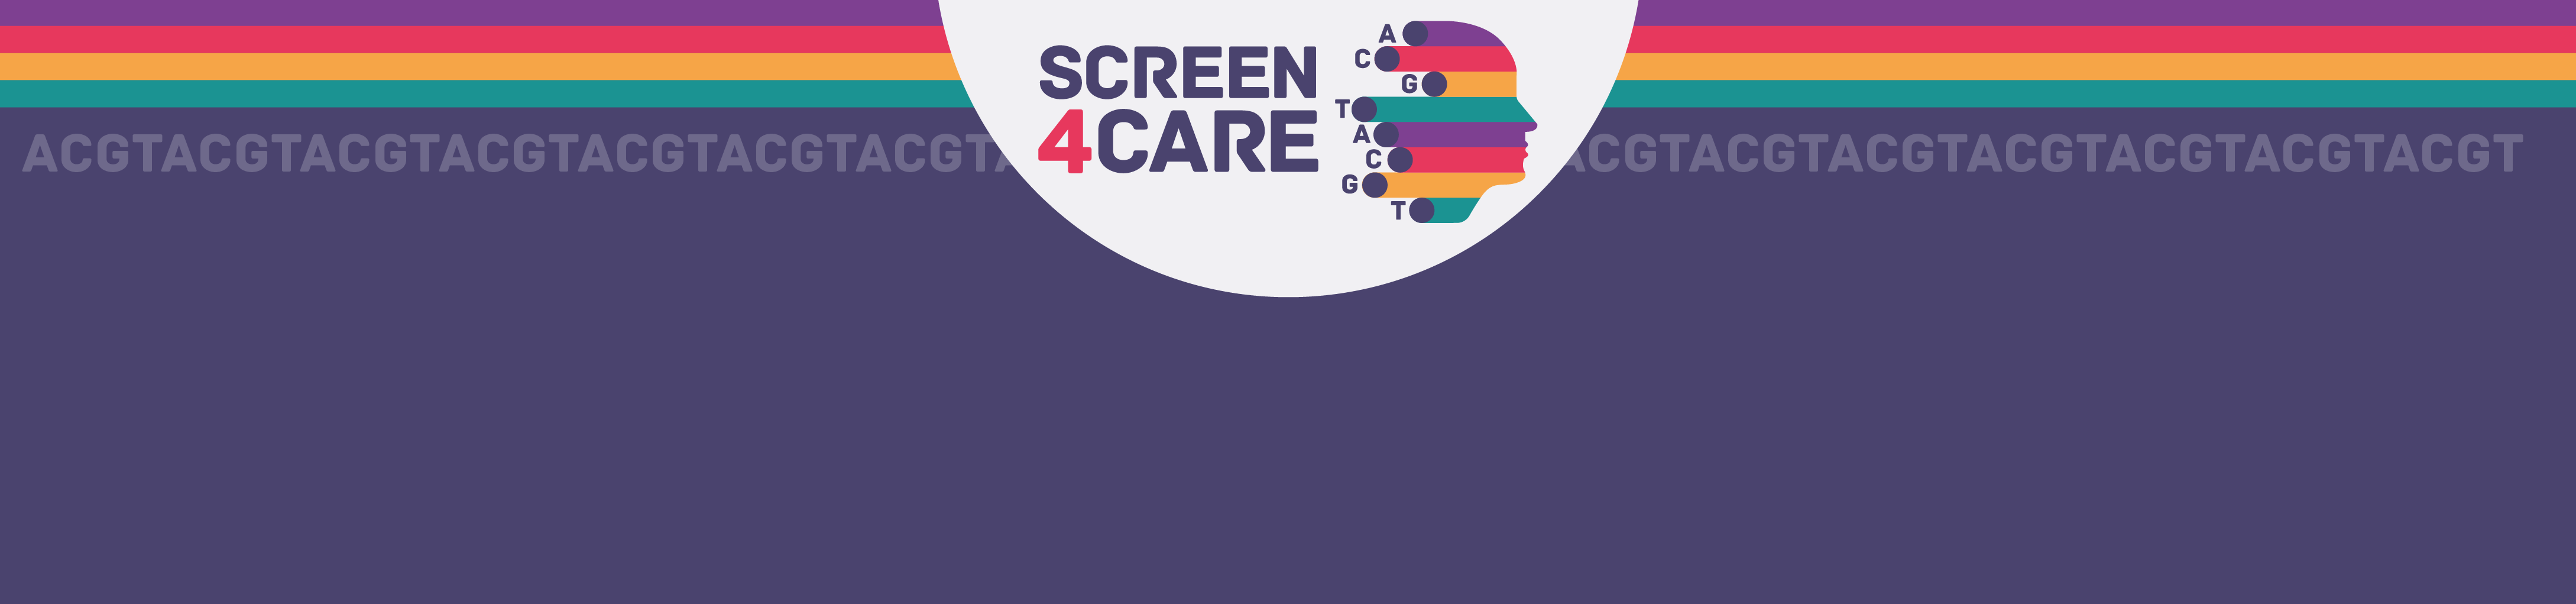 New EU Research Project “Screen4Care”: Accelerating Diagnosis for Rare Disease Patients Through Genetic Newborn Screening and Artificial Intelligence